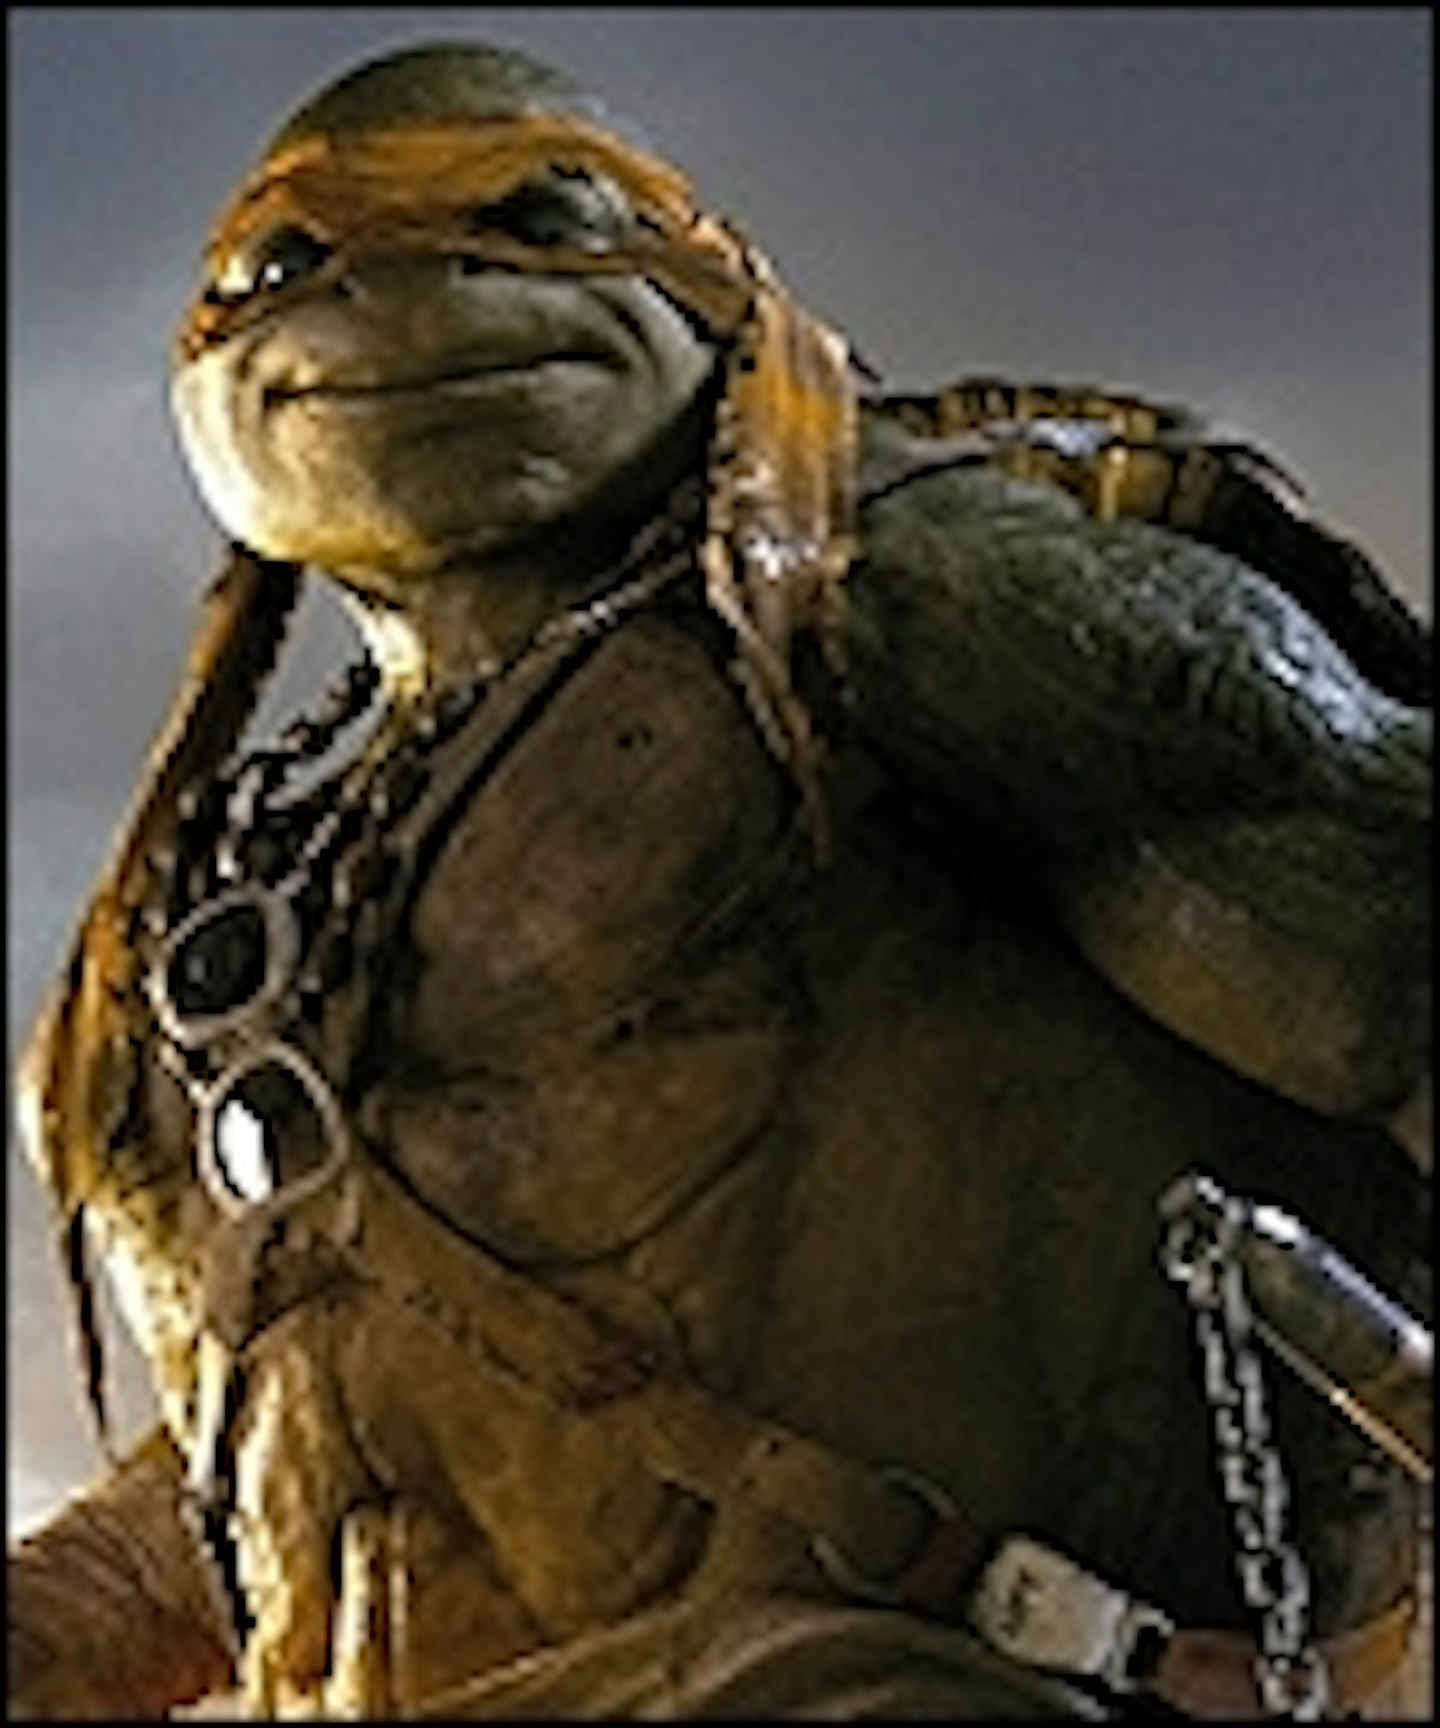 New Ninja Turtles Trailer And Character Posters